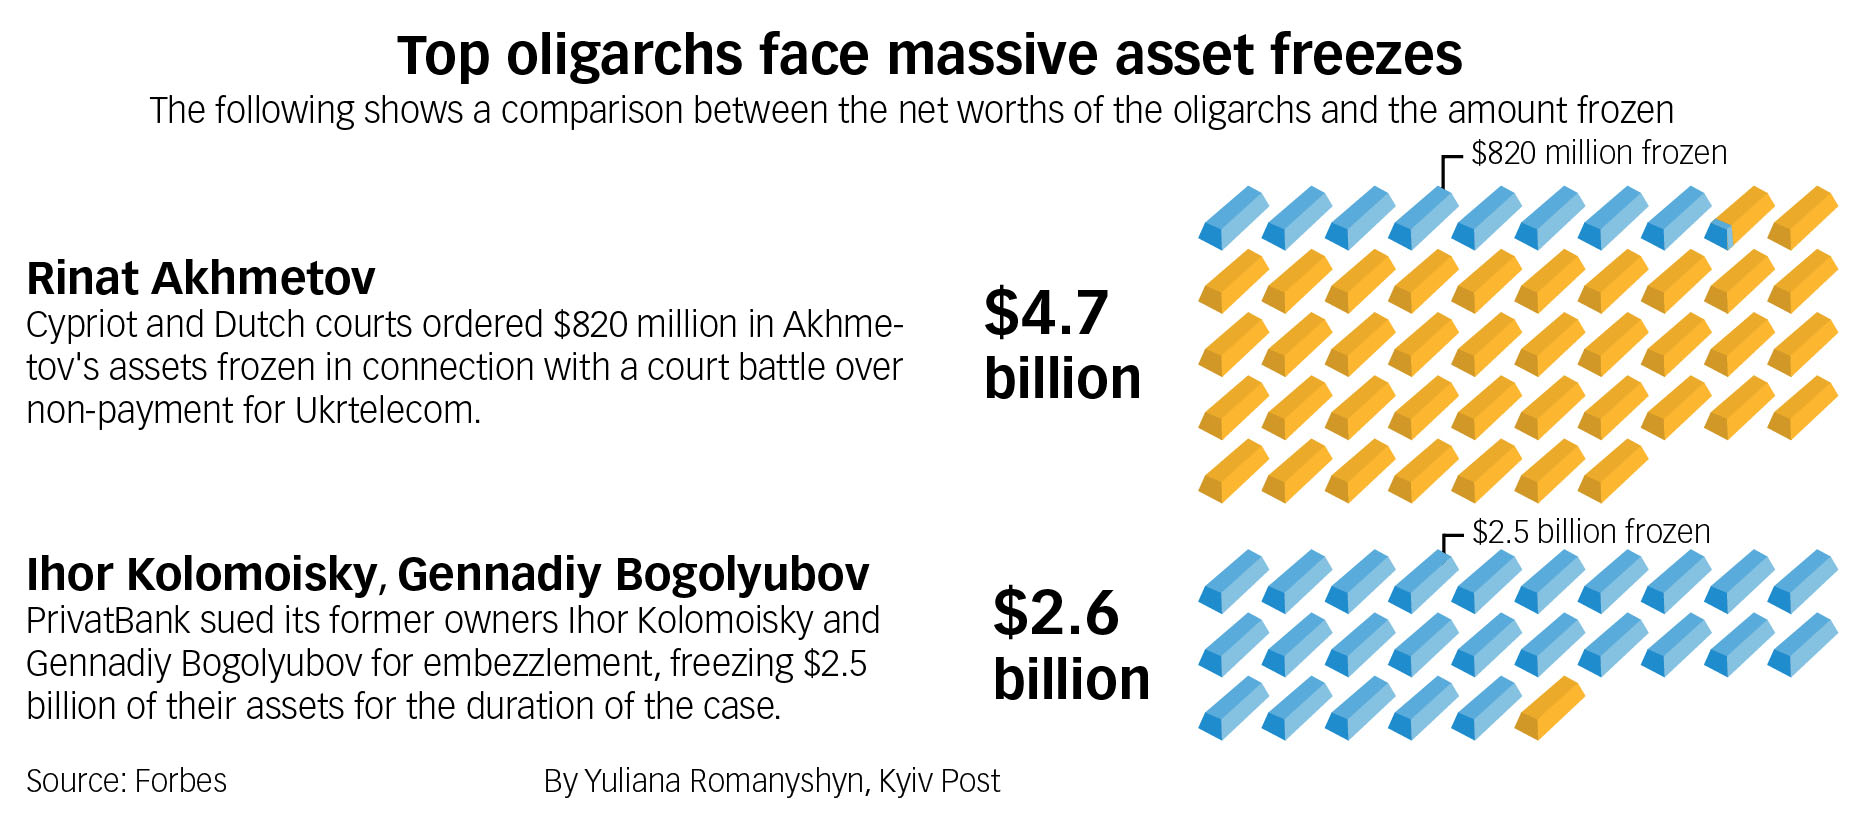 Based on Forbes' estimates of their estimated net worth, a significant portion of the net worth of billionaire oligarchs Rinat Akhmetov, Ihor Kolomoisky, and Gennadiy Bogolyubov have been frozen because of legal disputes.